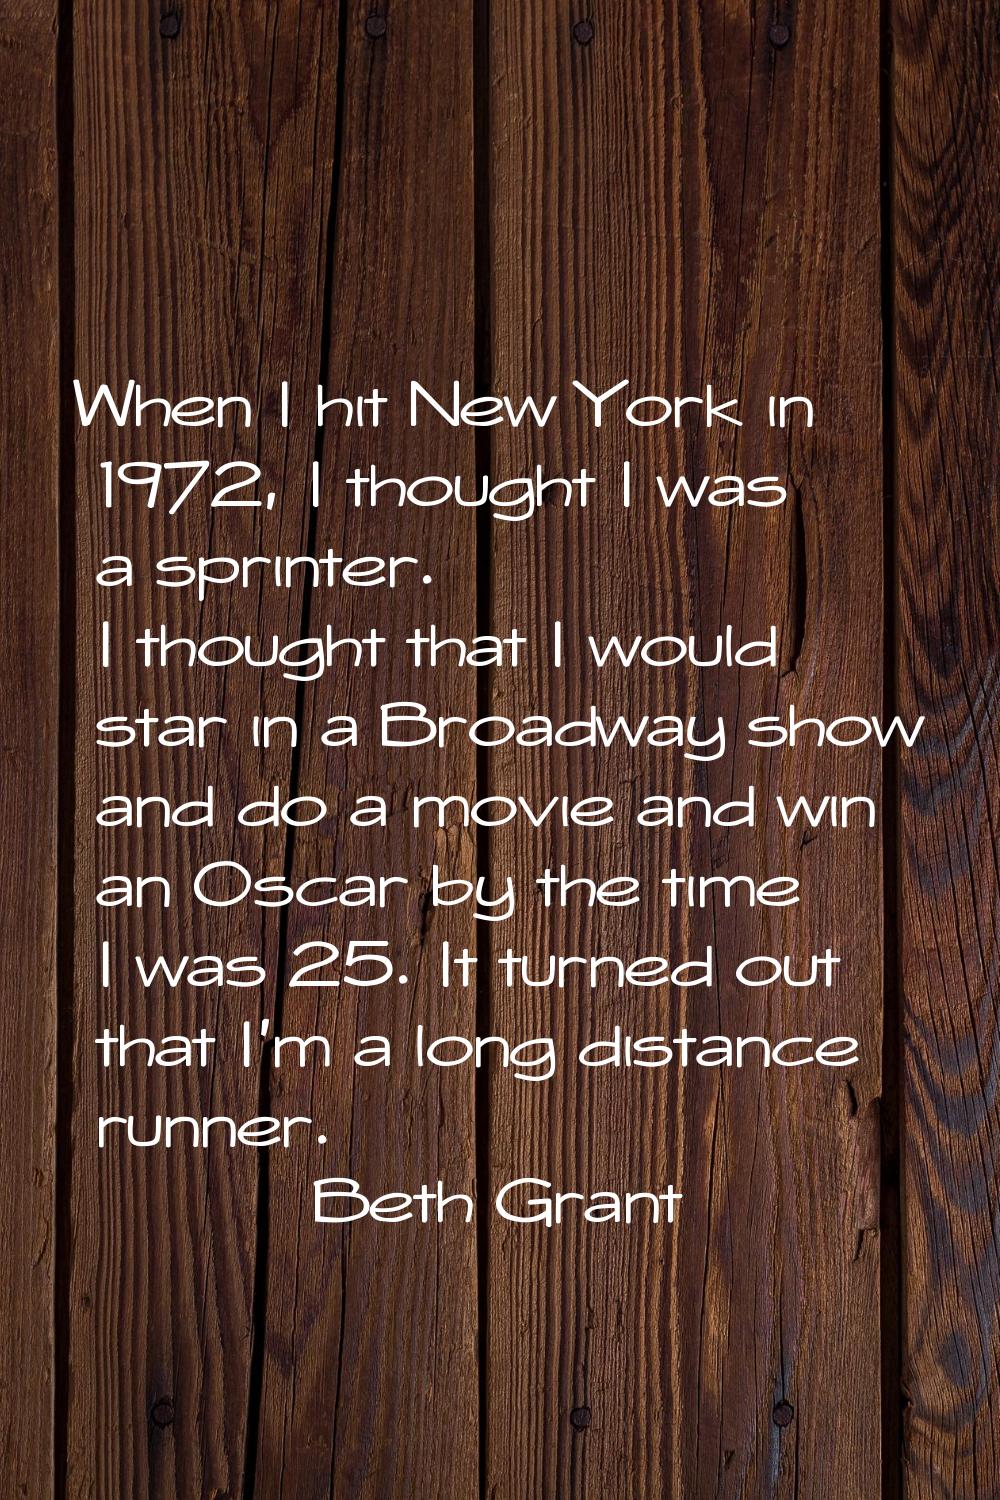 When I hit New York in 1972, I thought I was a sprinter. I thought that I would star in a Broadway 